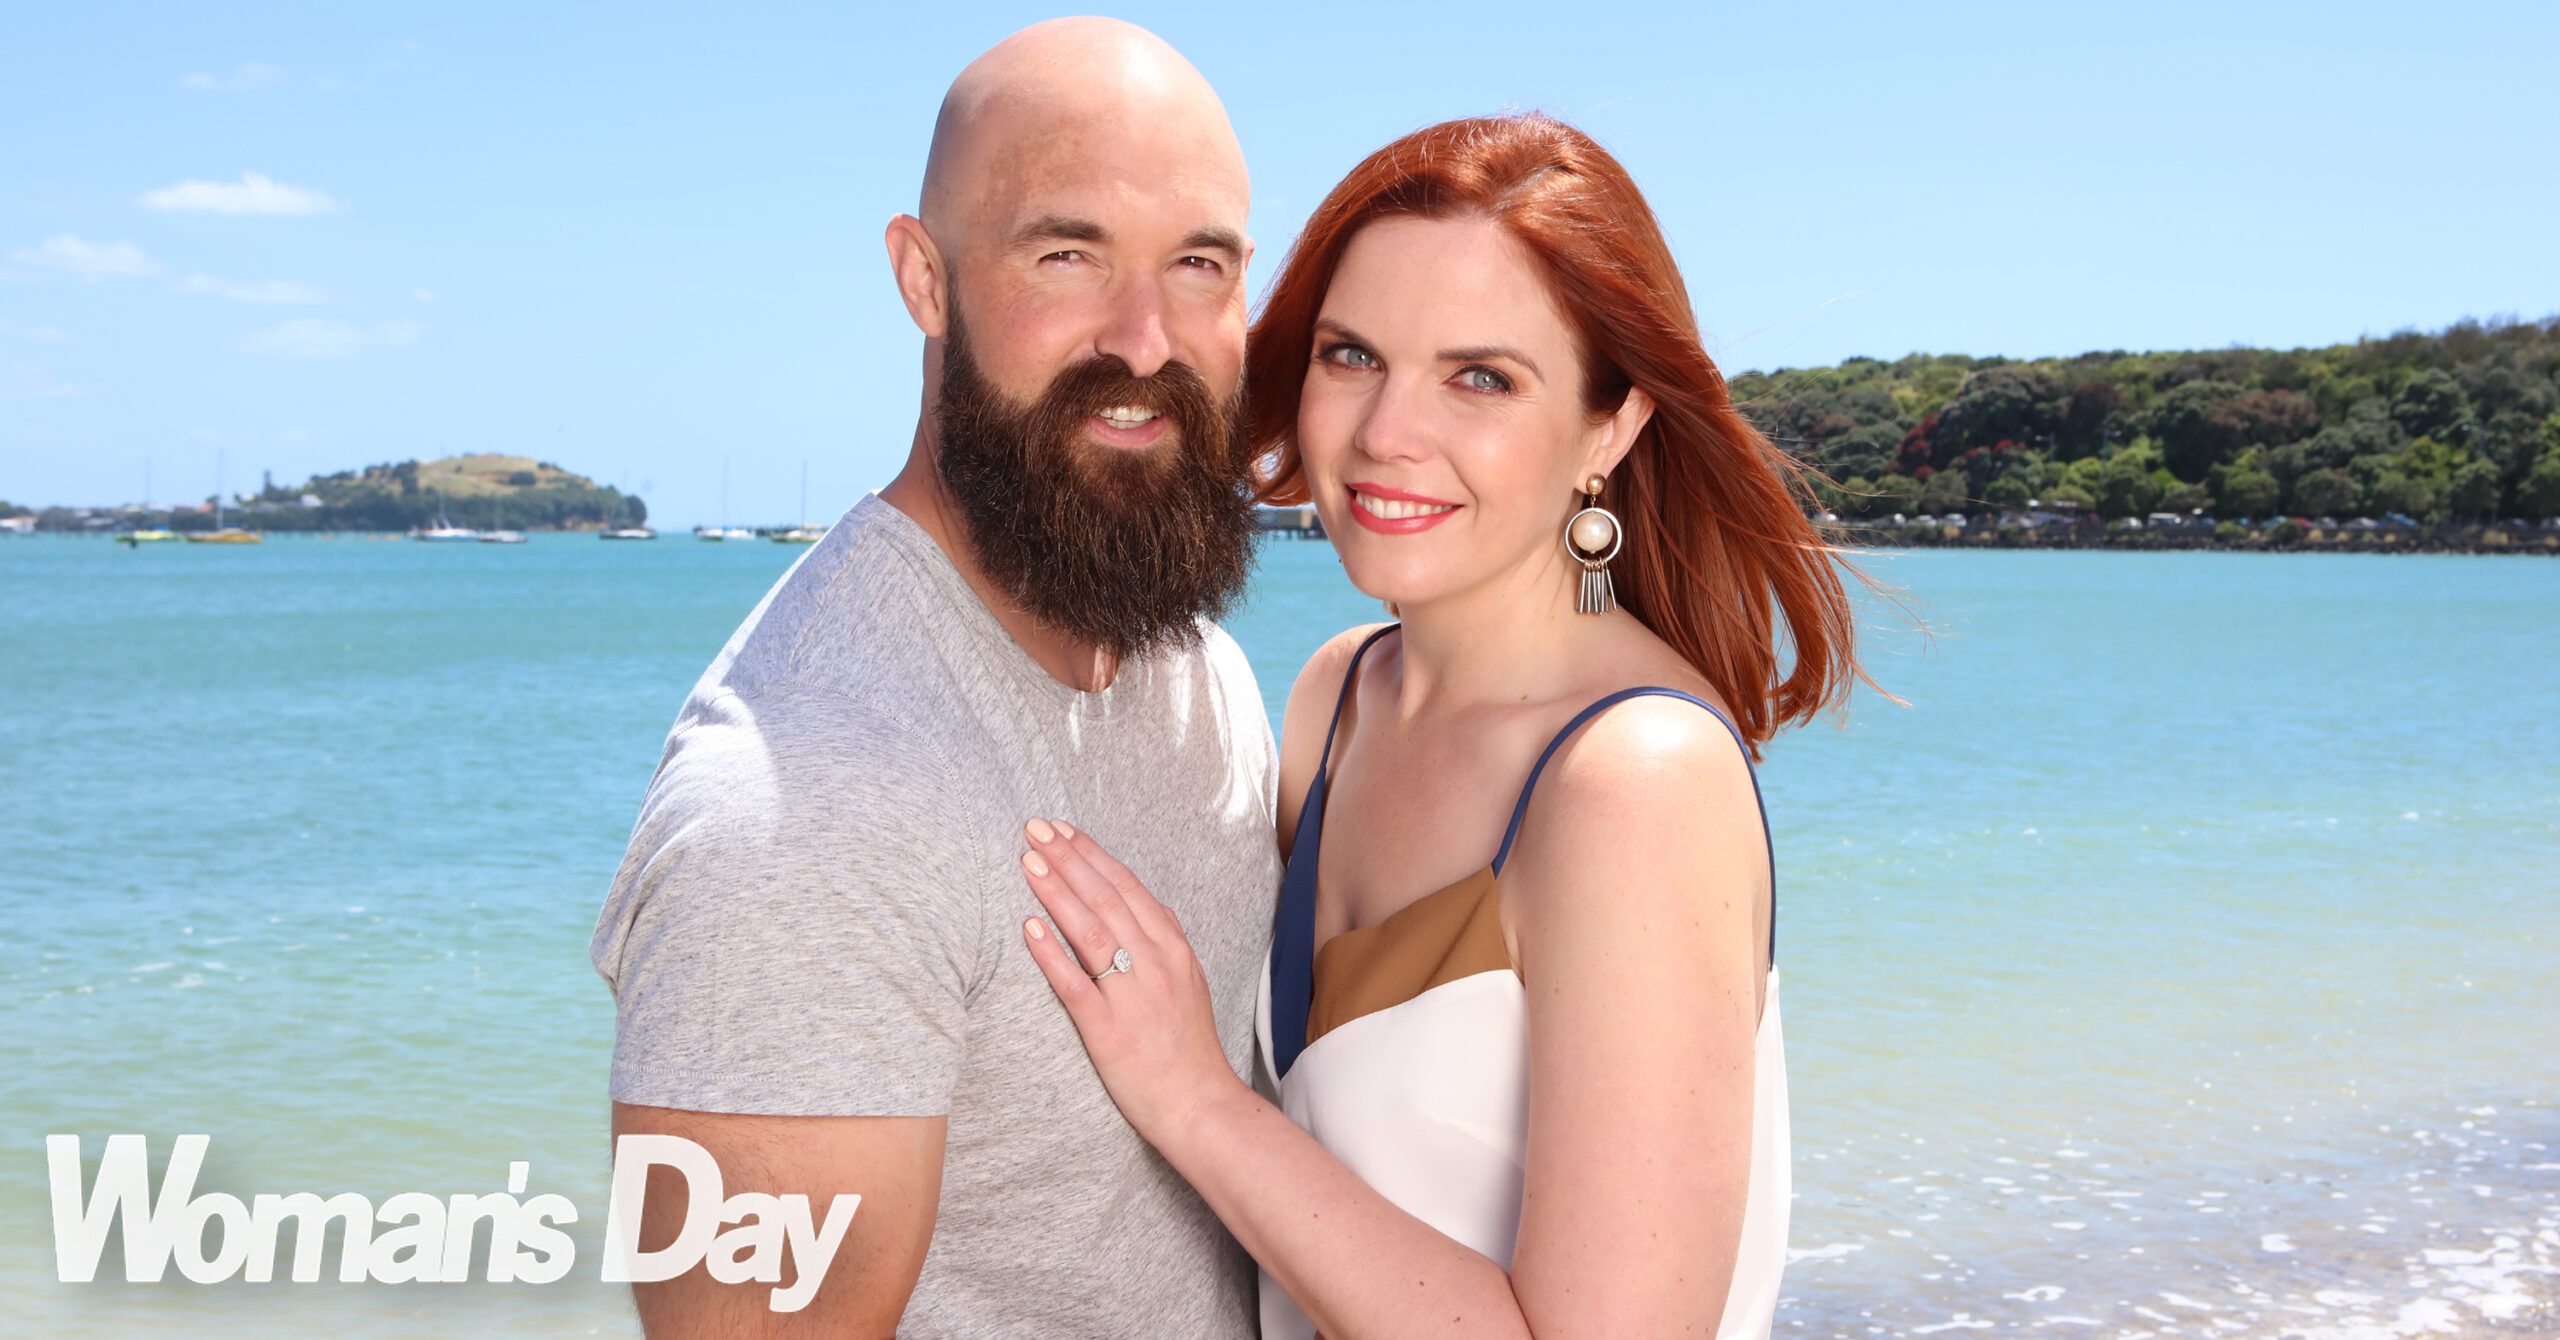 TVNZ’s Jessica Mutch engaged to her ‘hipster bodyguard’ beau